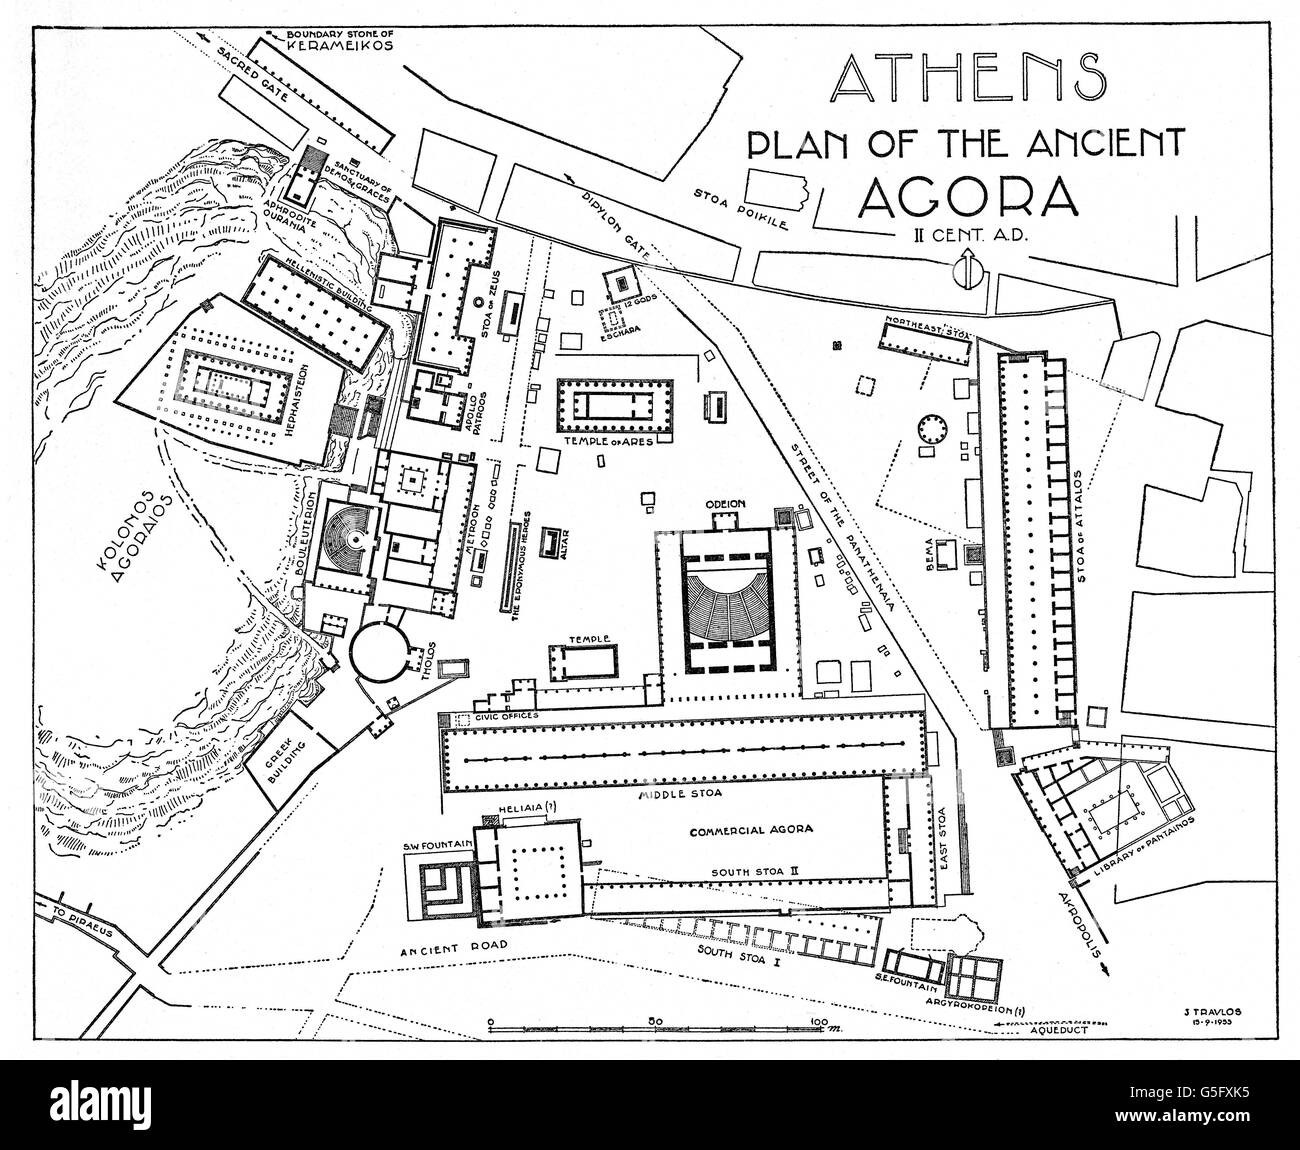 geography / travel, Greece, Athens, agora, in the 2nd century AD, site plan, drawing by J. Travlos, American School of Classic Studies, 1955, Additional-Rights-Clearences-Not Available Stock Photo